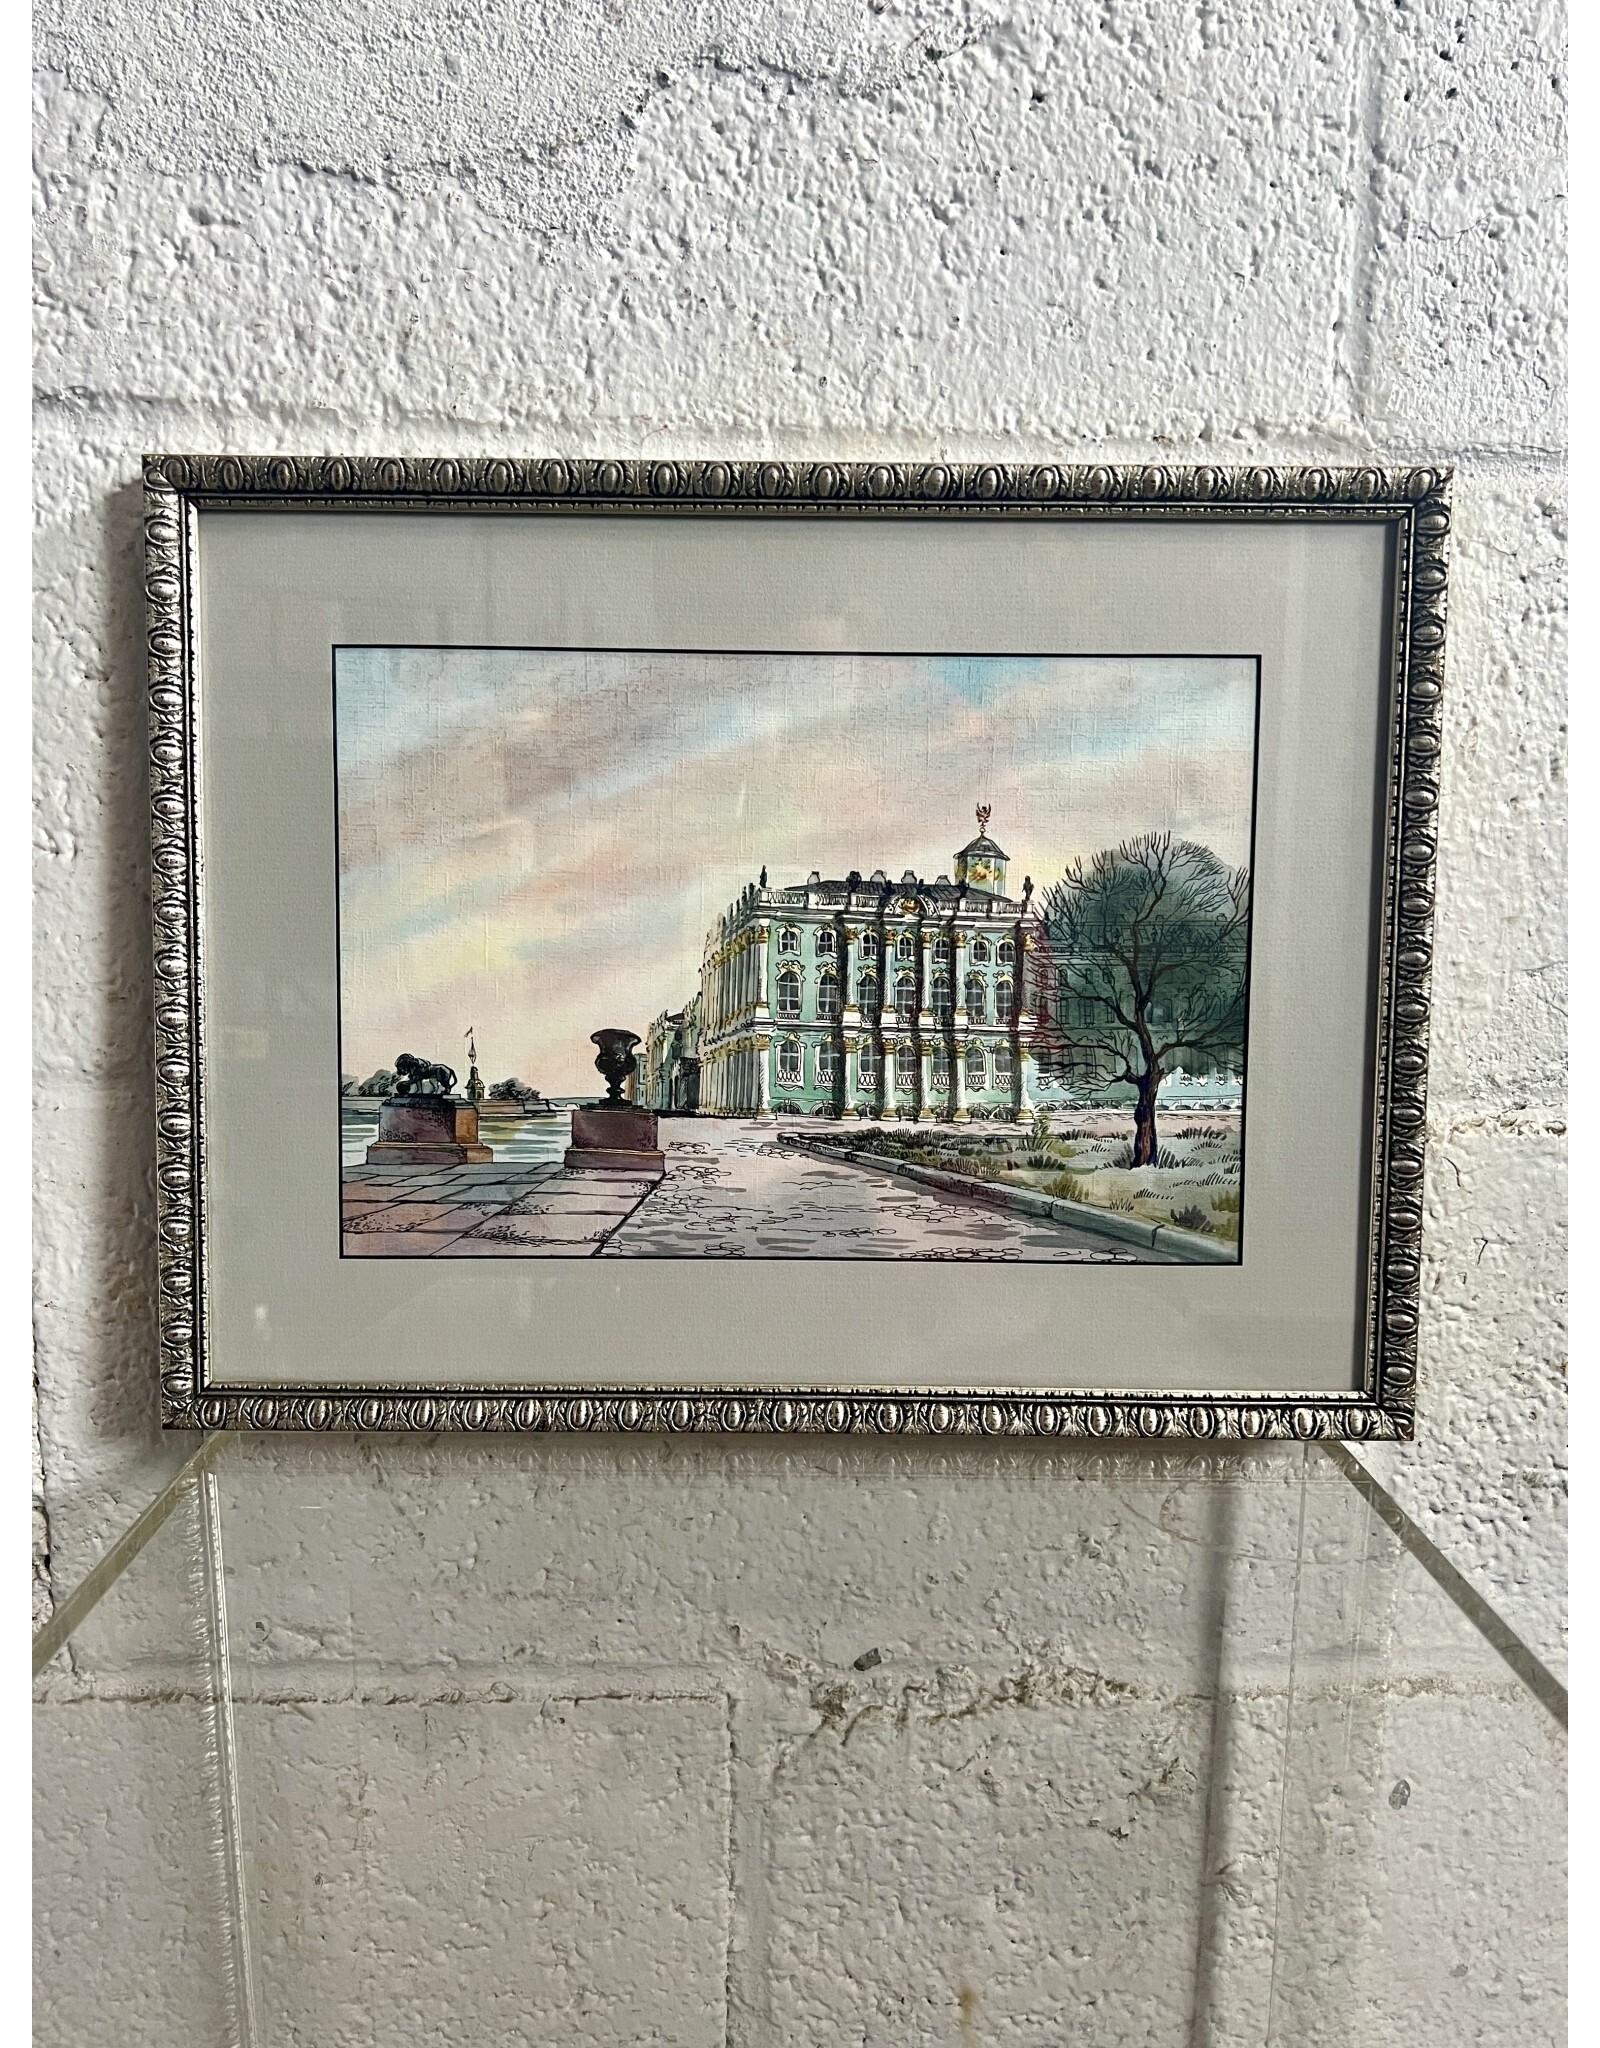 Statues, framed watercolor painting